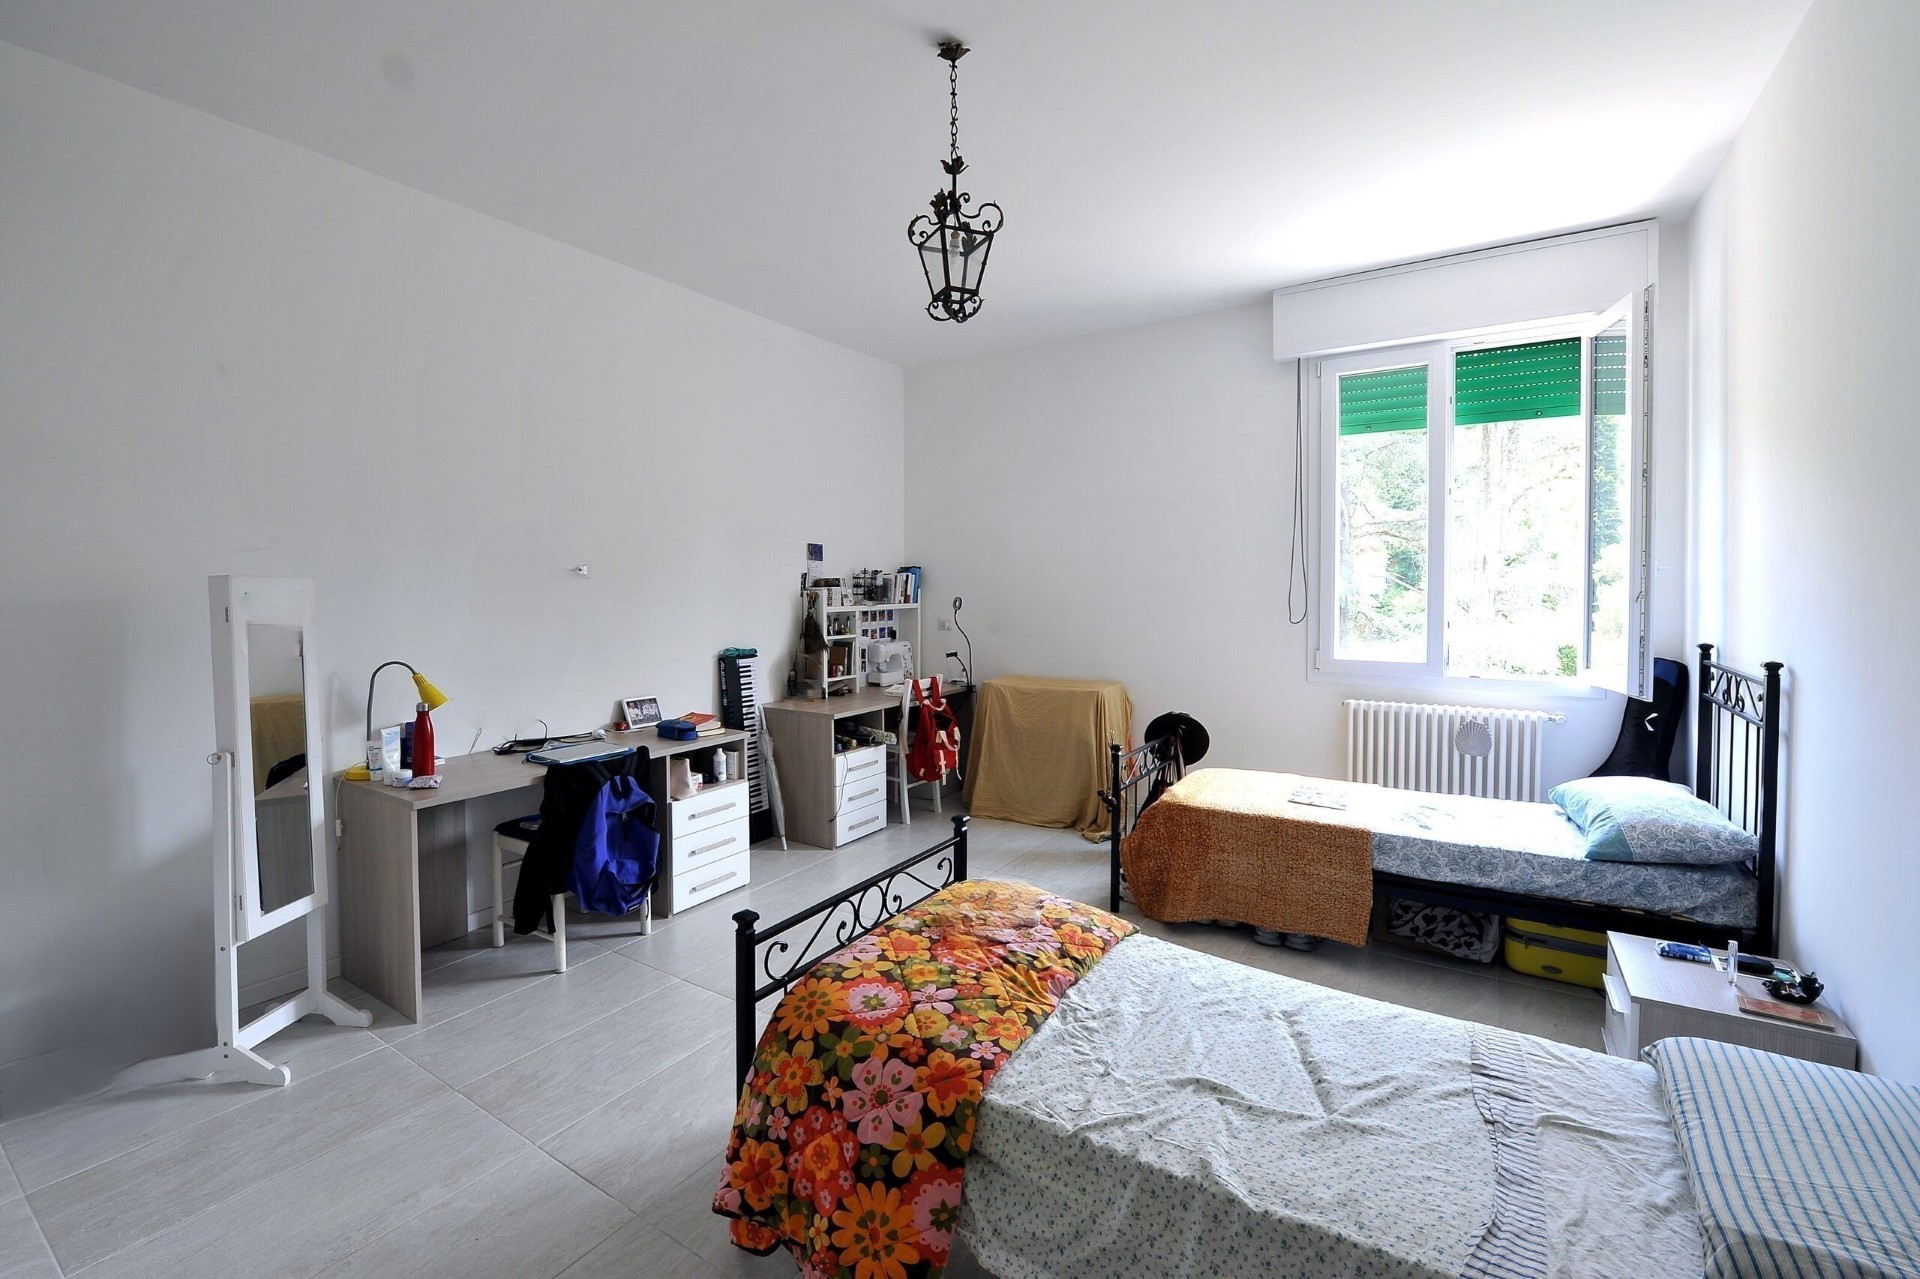 Furnished room in the apartment on Saragozza street